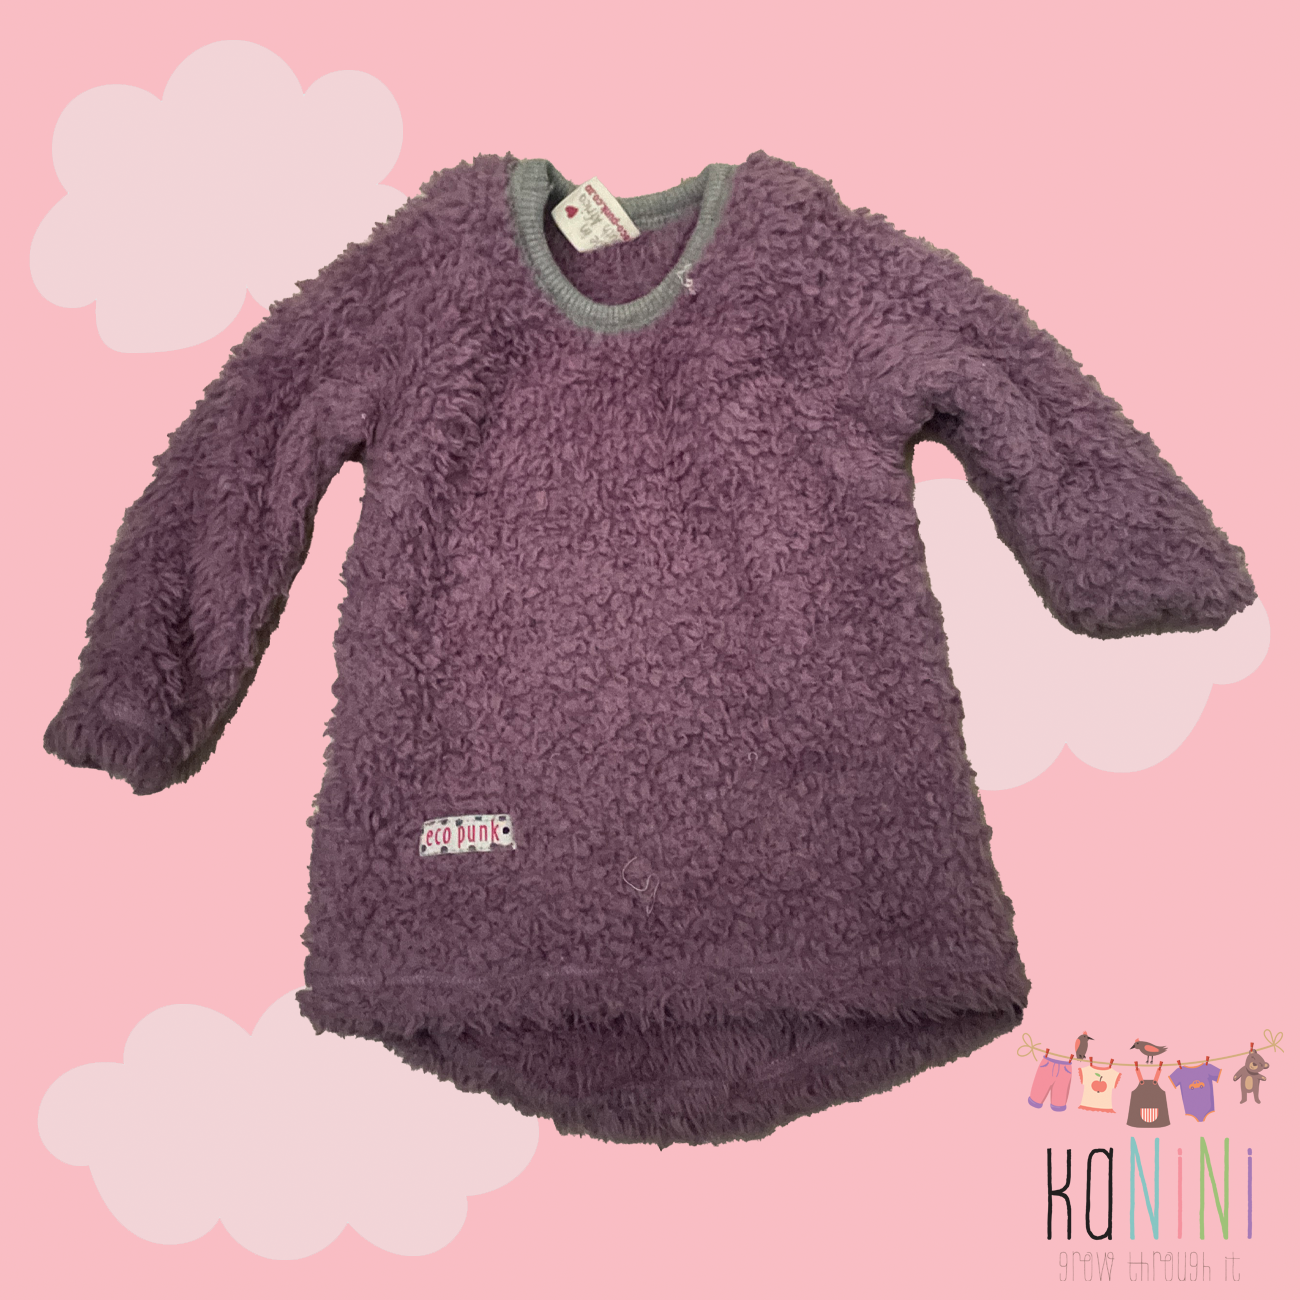 Featured image for “Eco Punk 6 - 12 Months Girls Fleecy Sweater”